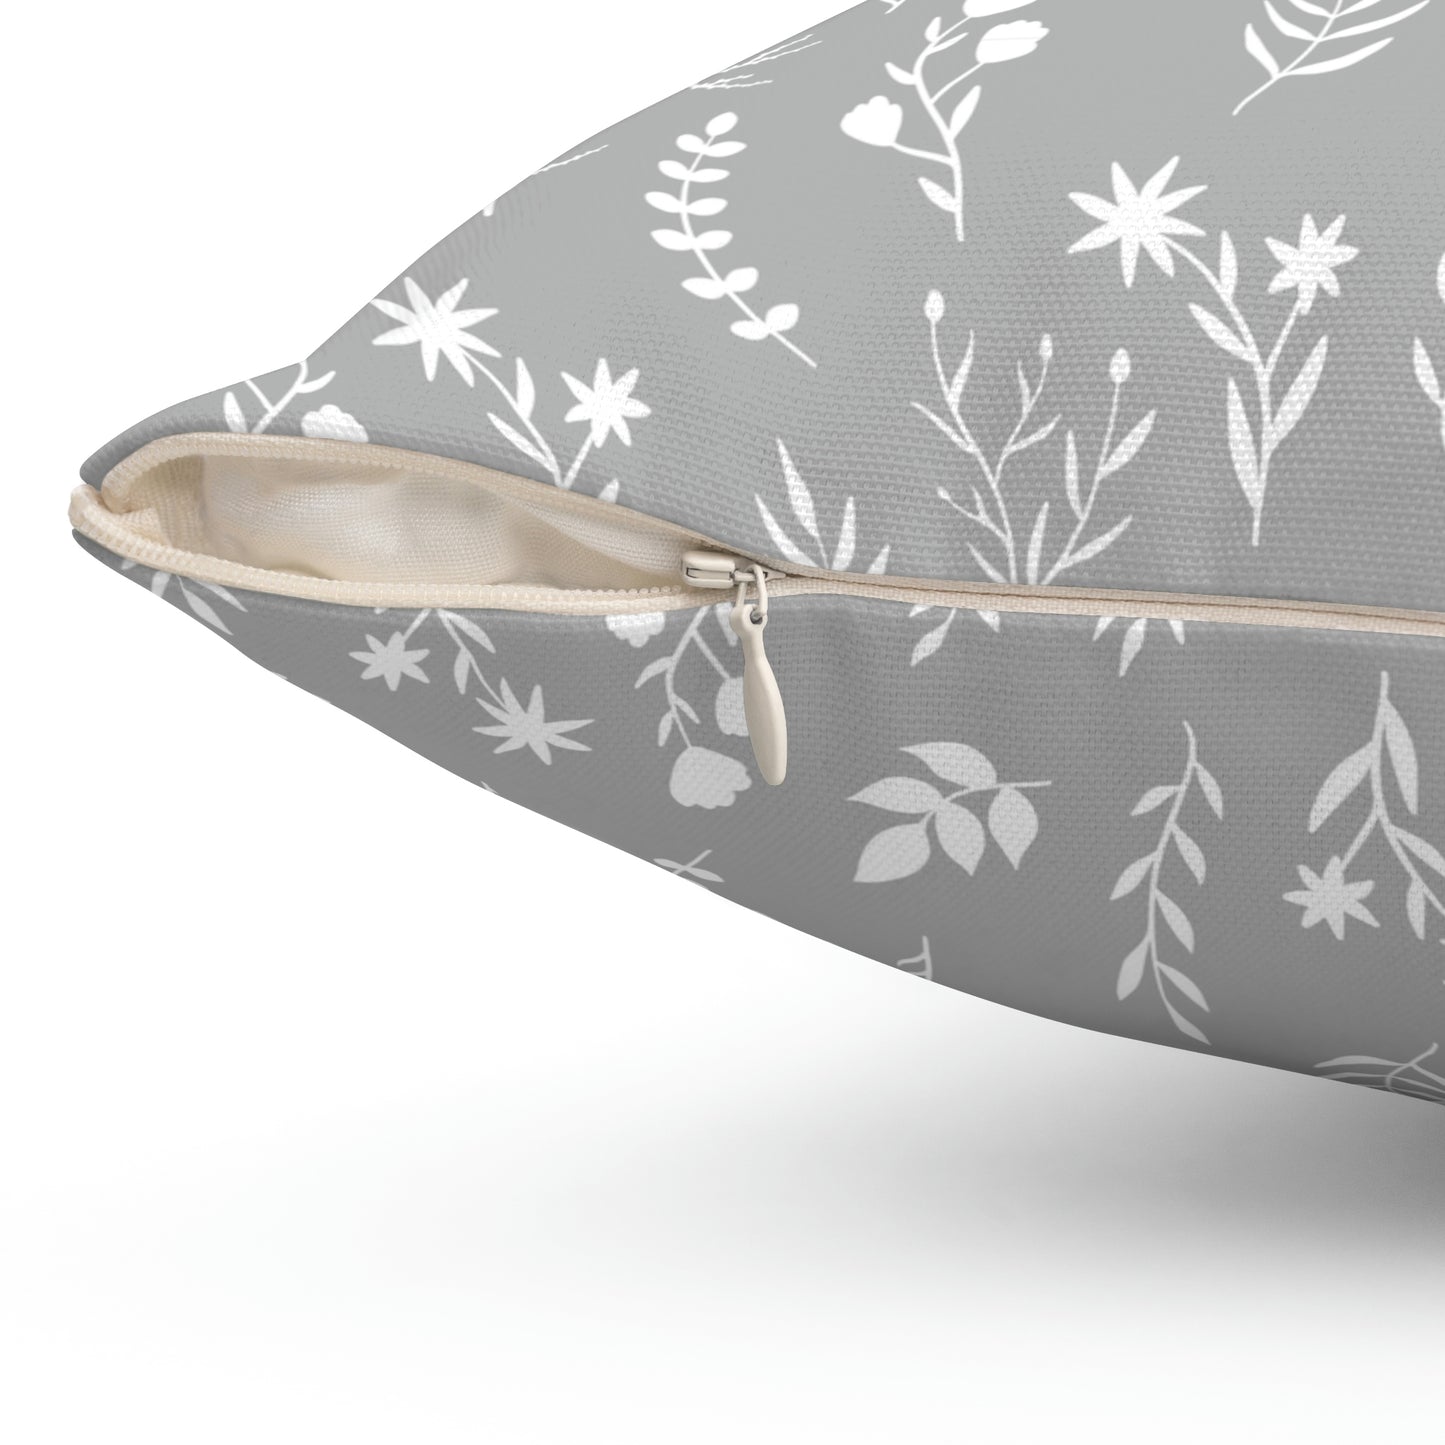 Grey and White Floral Pillow | 4 Sizes Available